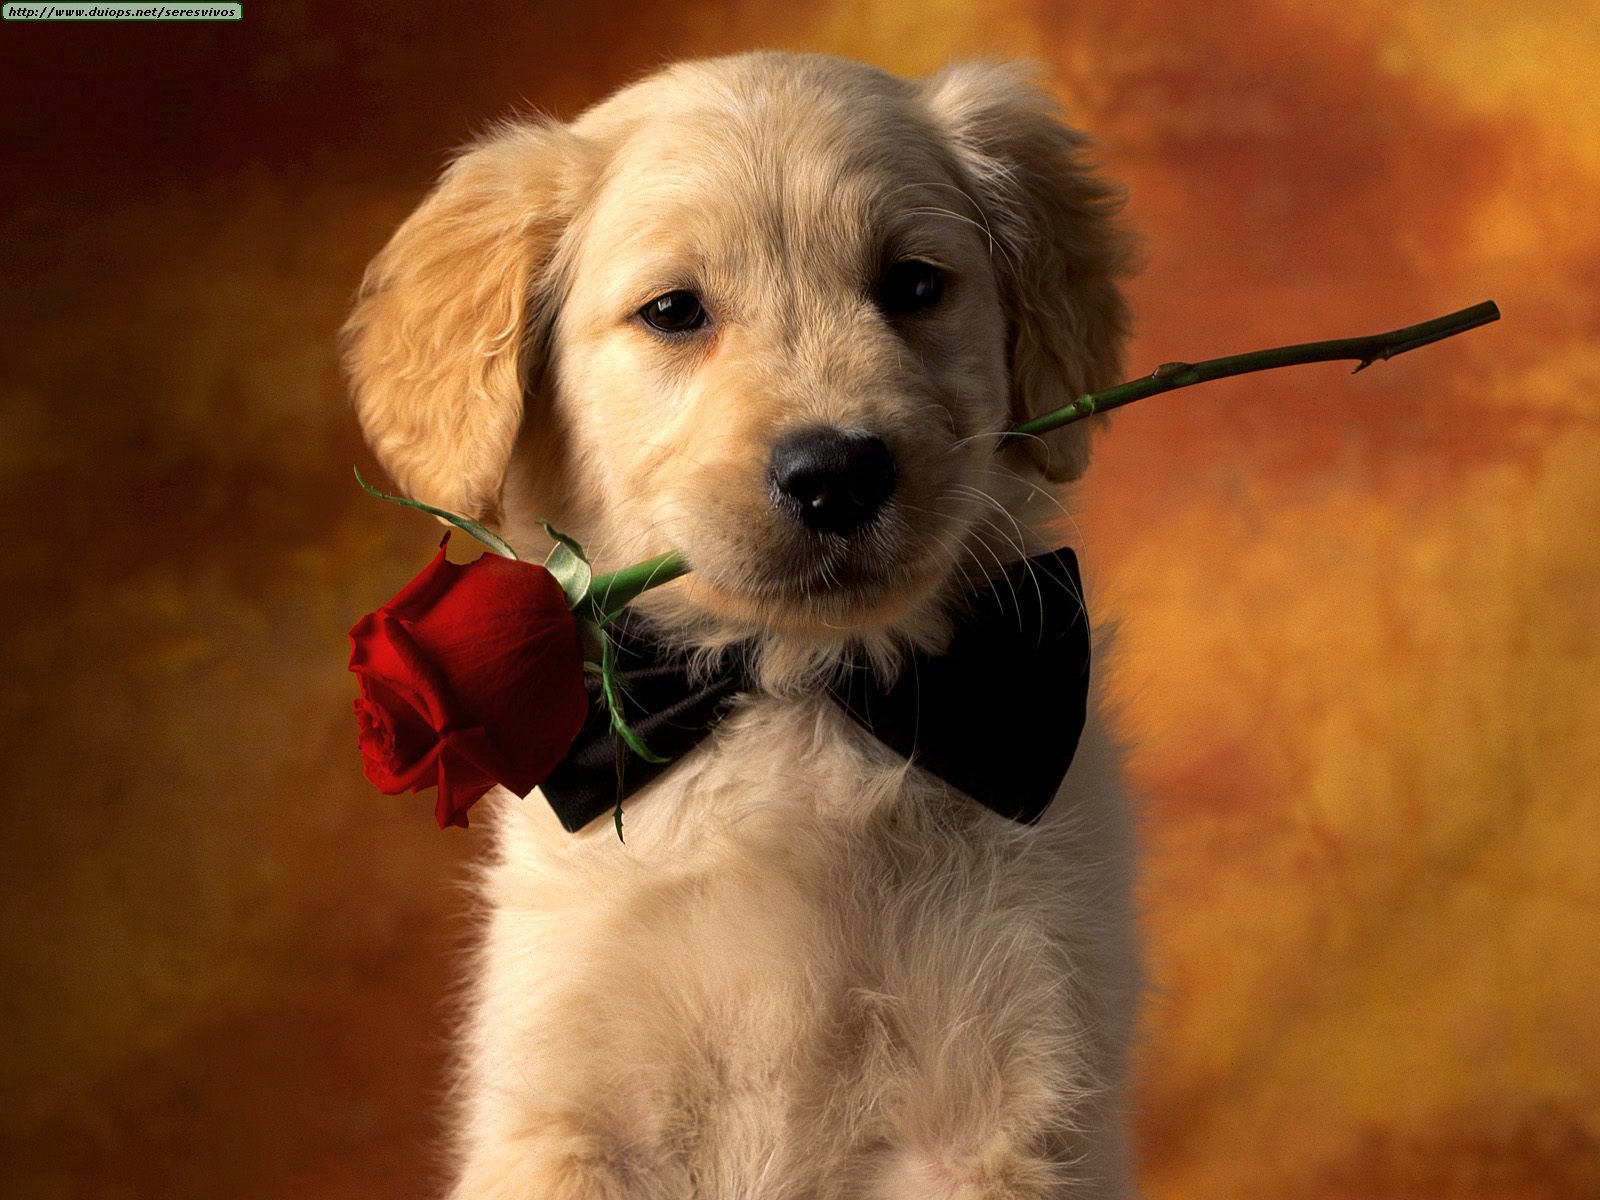 Funny Wallpapers: Puppy love, dogs, puppy, puppies, dog games, puppy ...